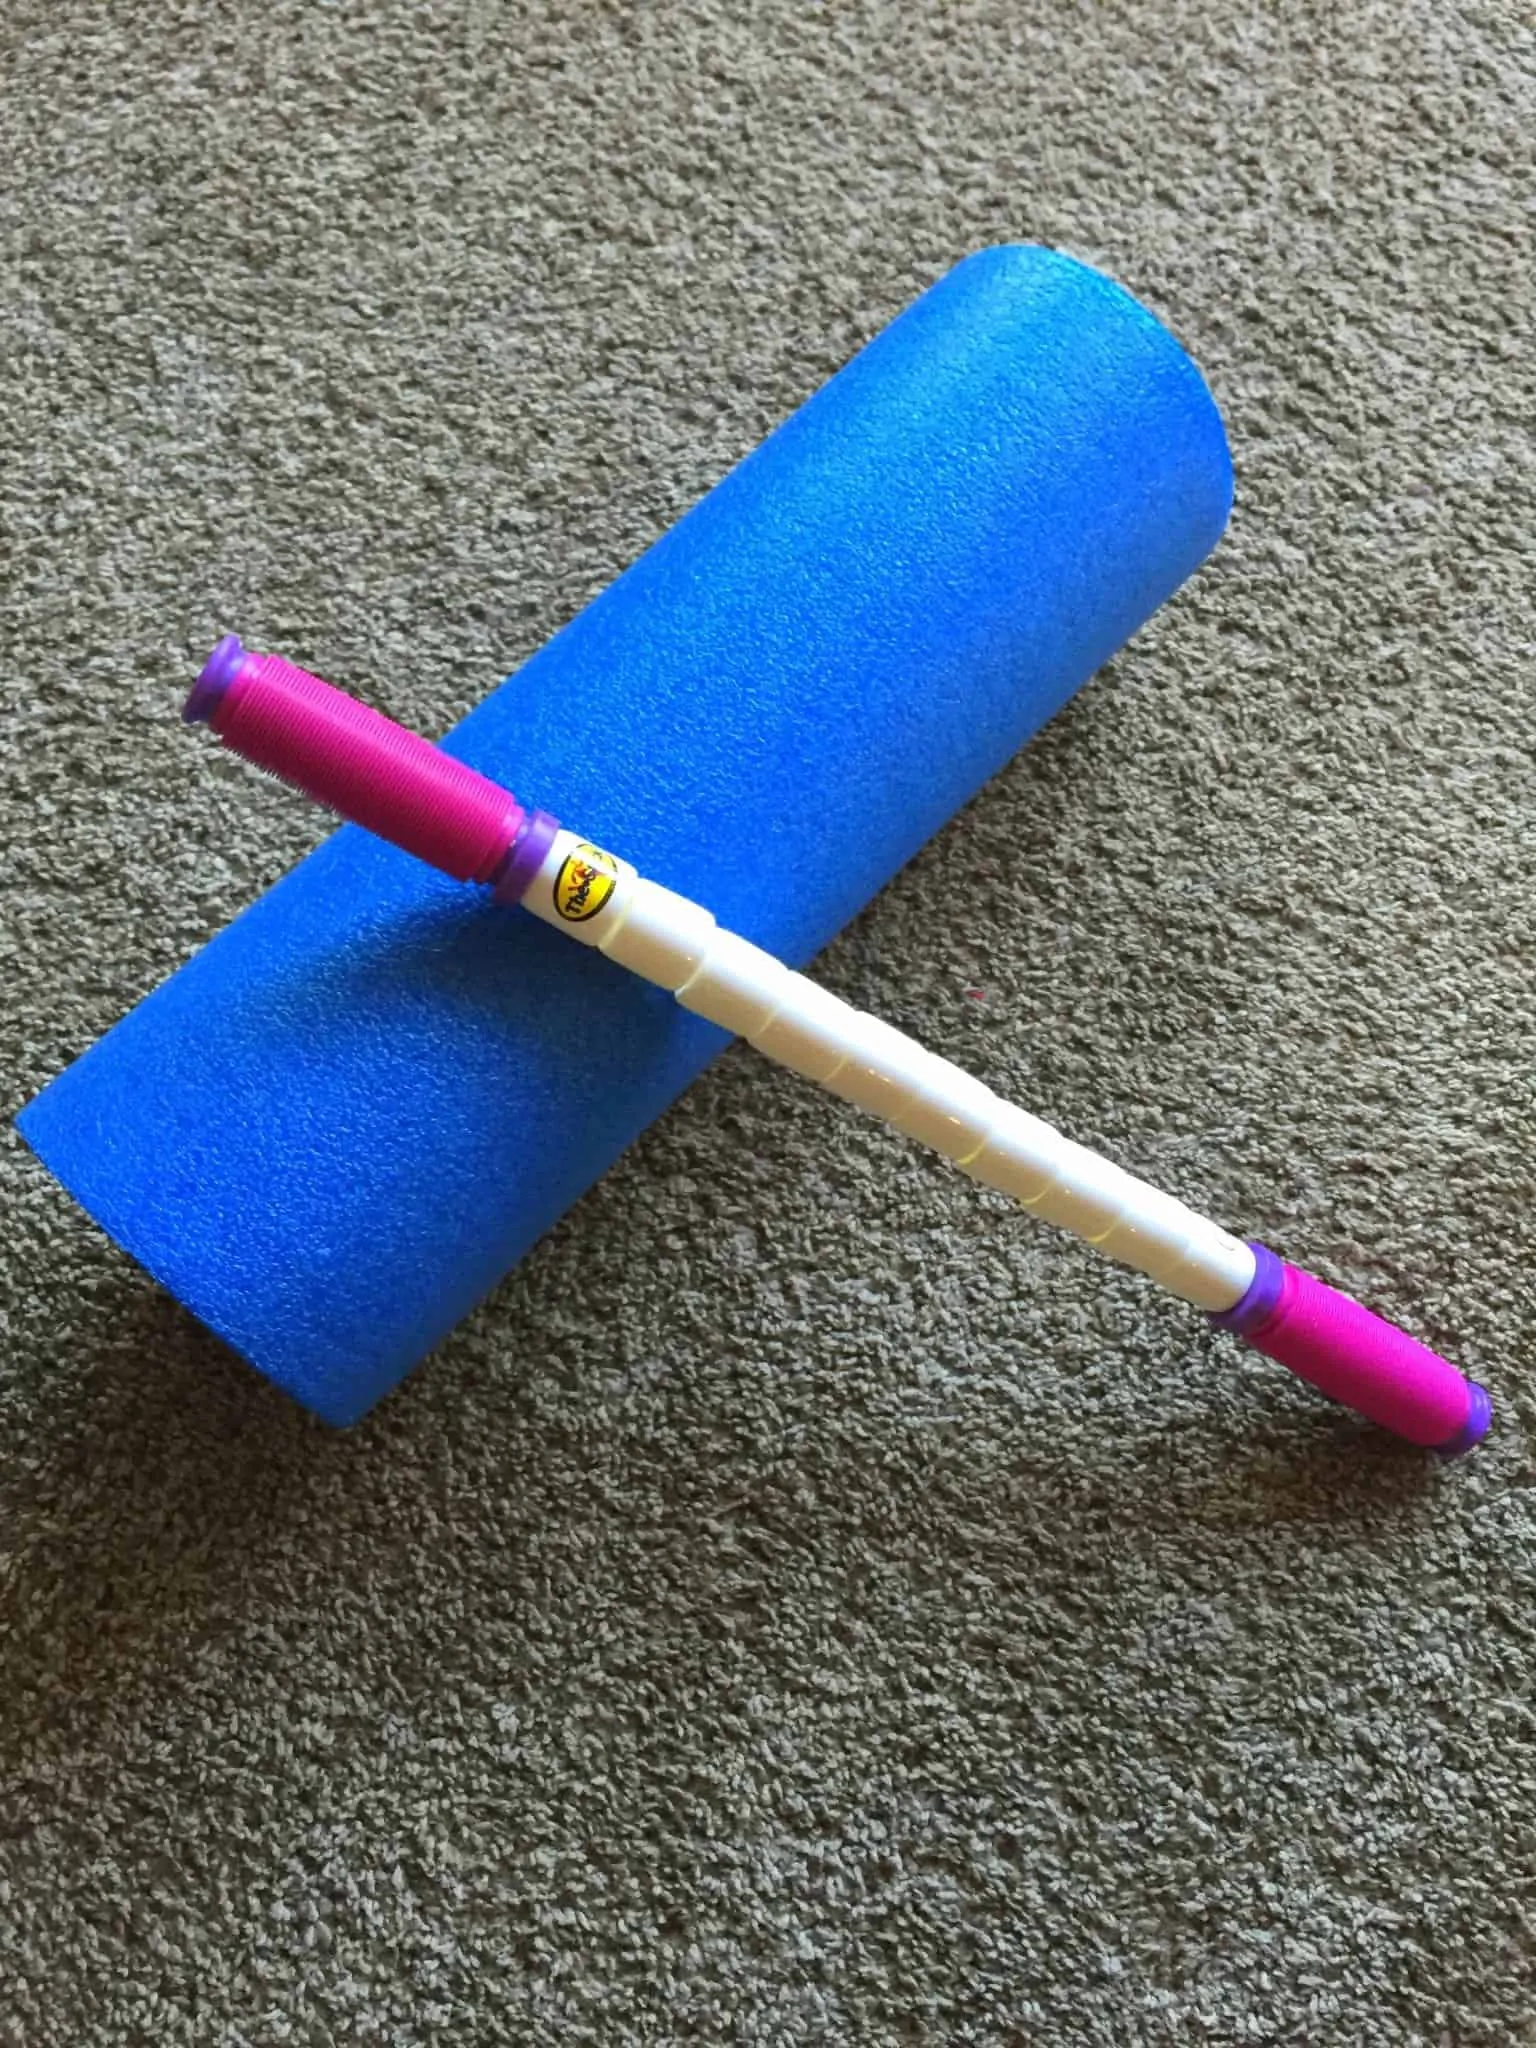 Foam Rolling and The Stick